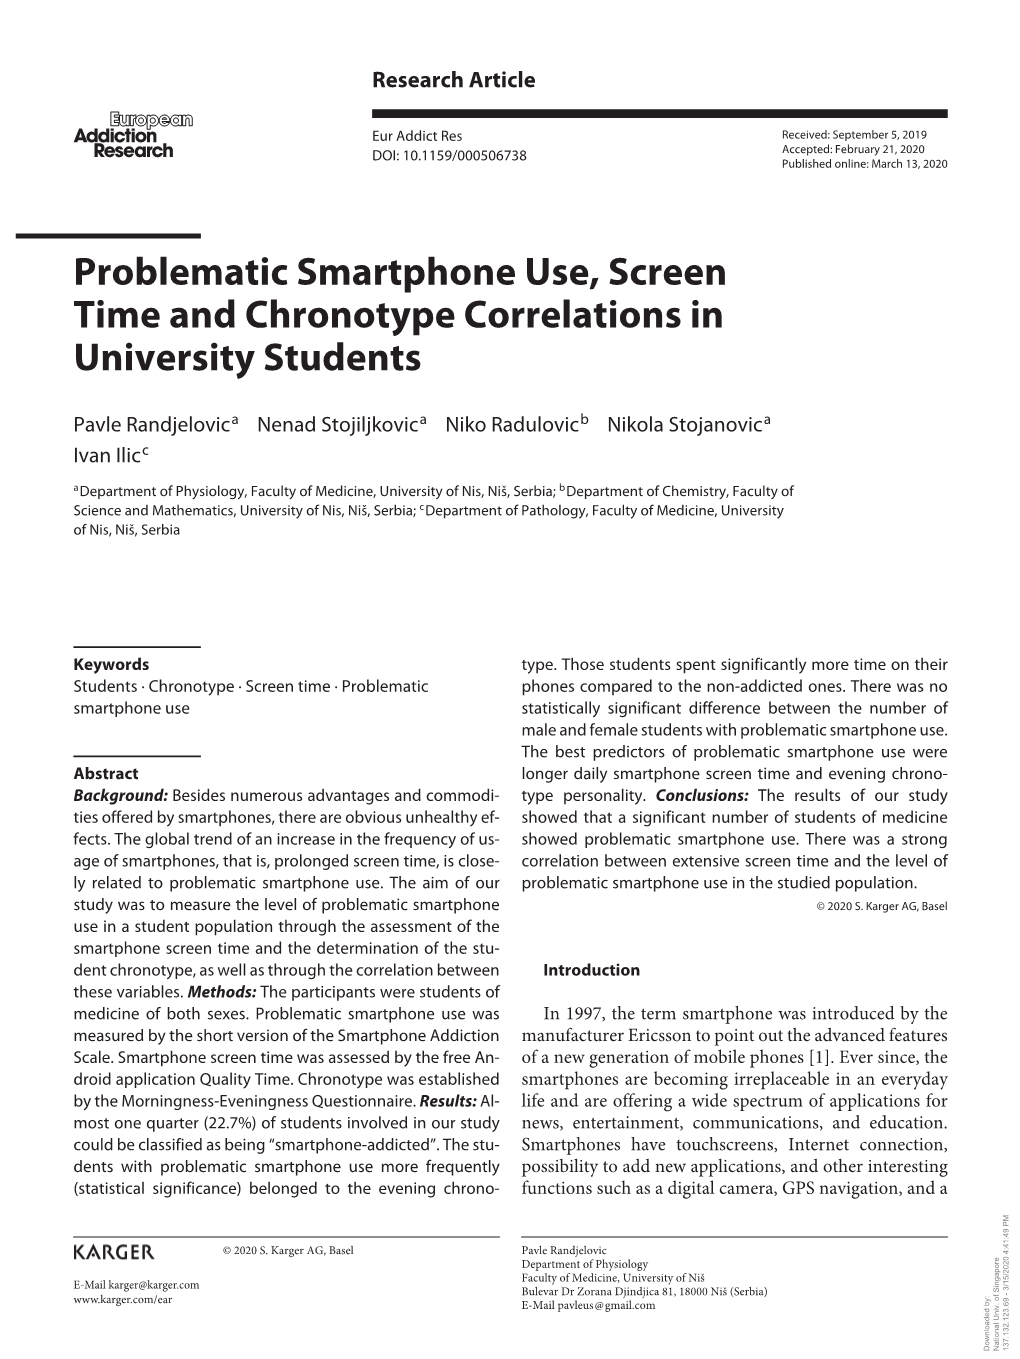 Problematic Smartphone Use, Screen Time and Chronotype Correlations in University Students